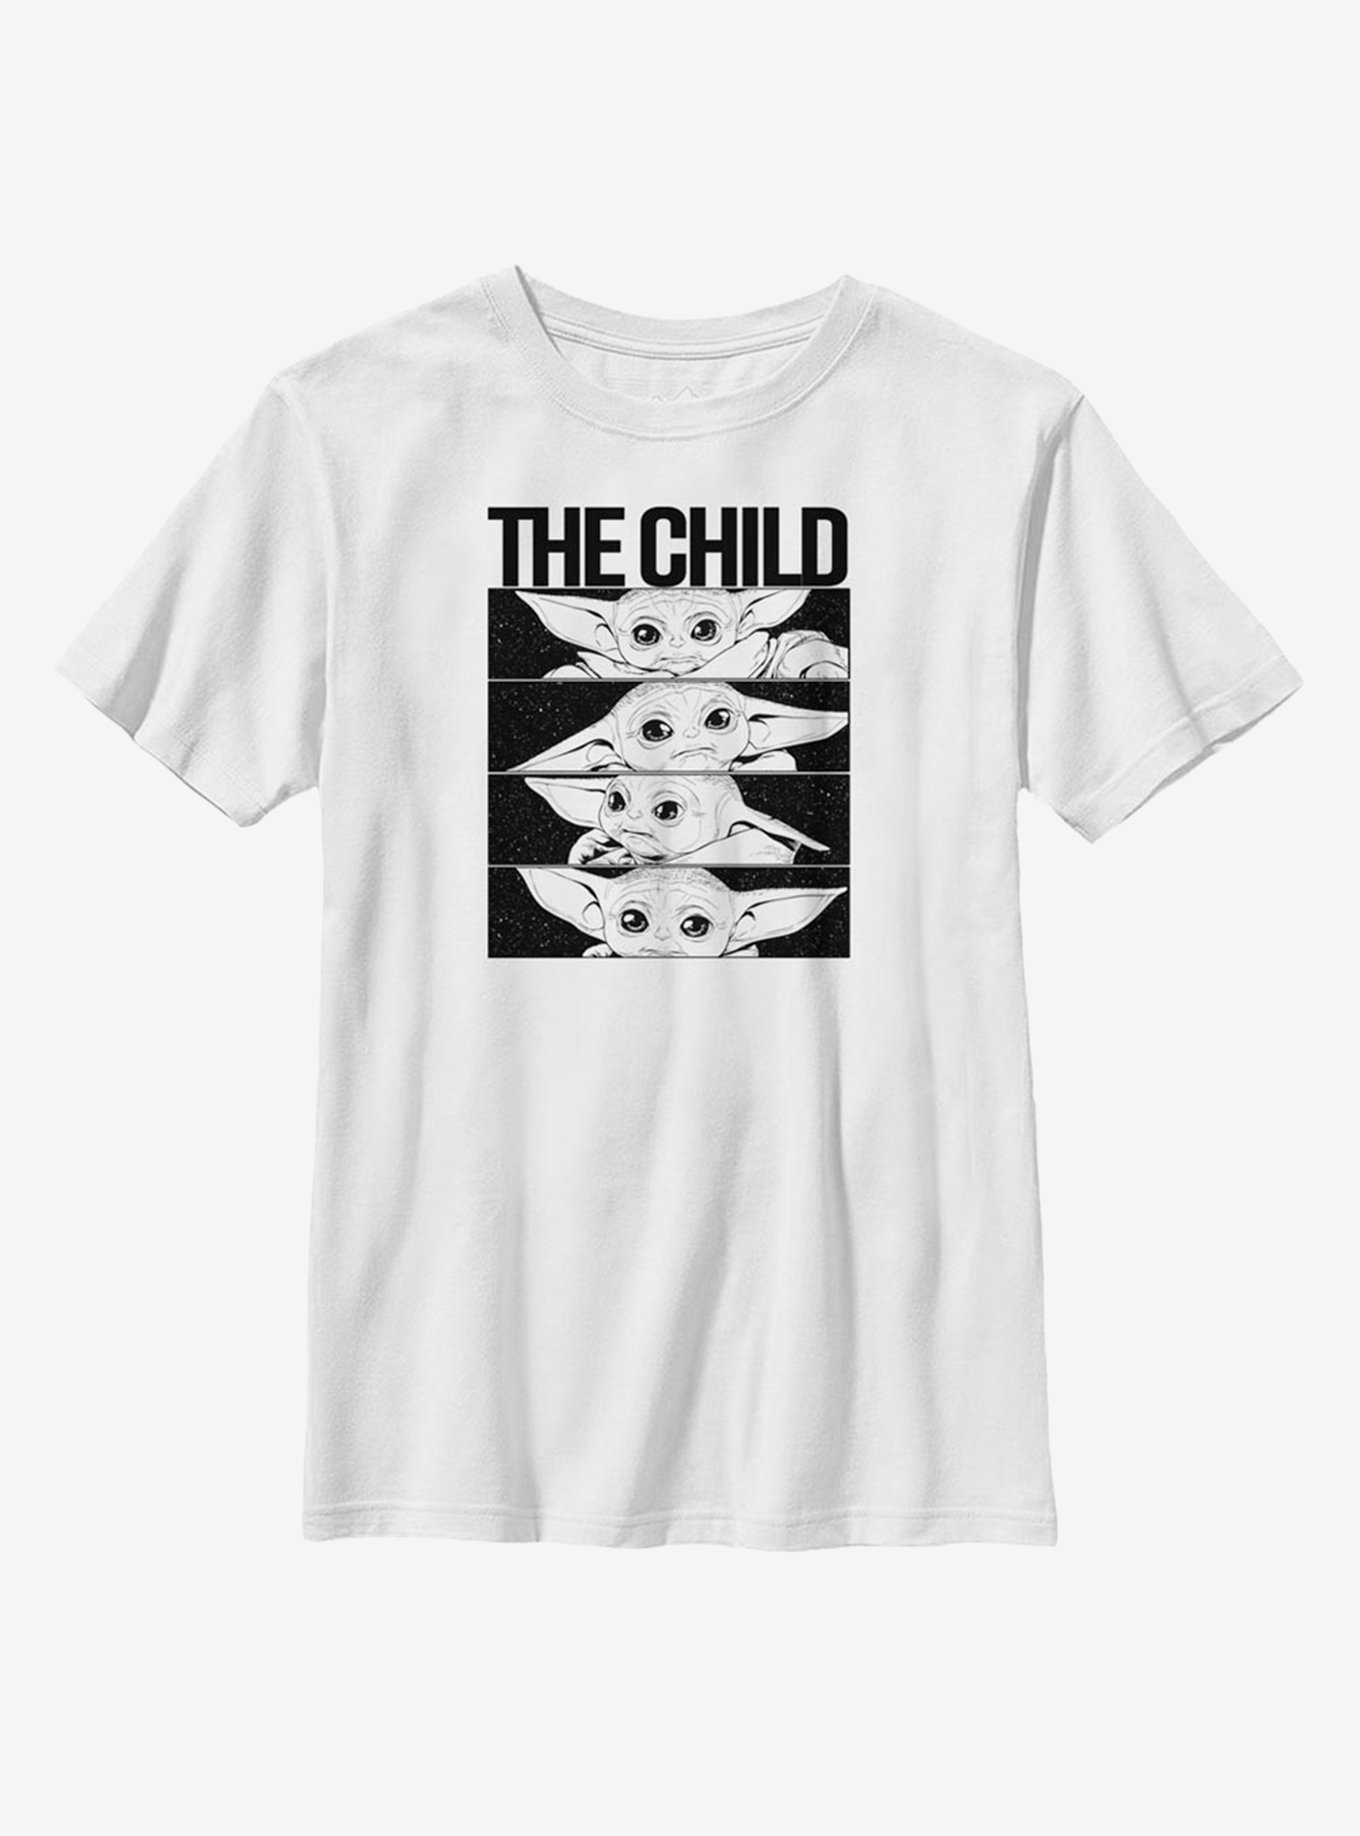 Star Wars The Mandalorian The Child Space Box Child Youth T-Shirt, , hi-res